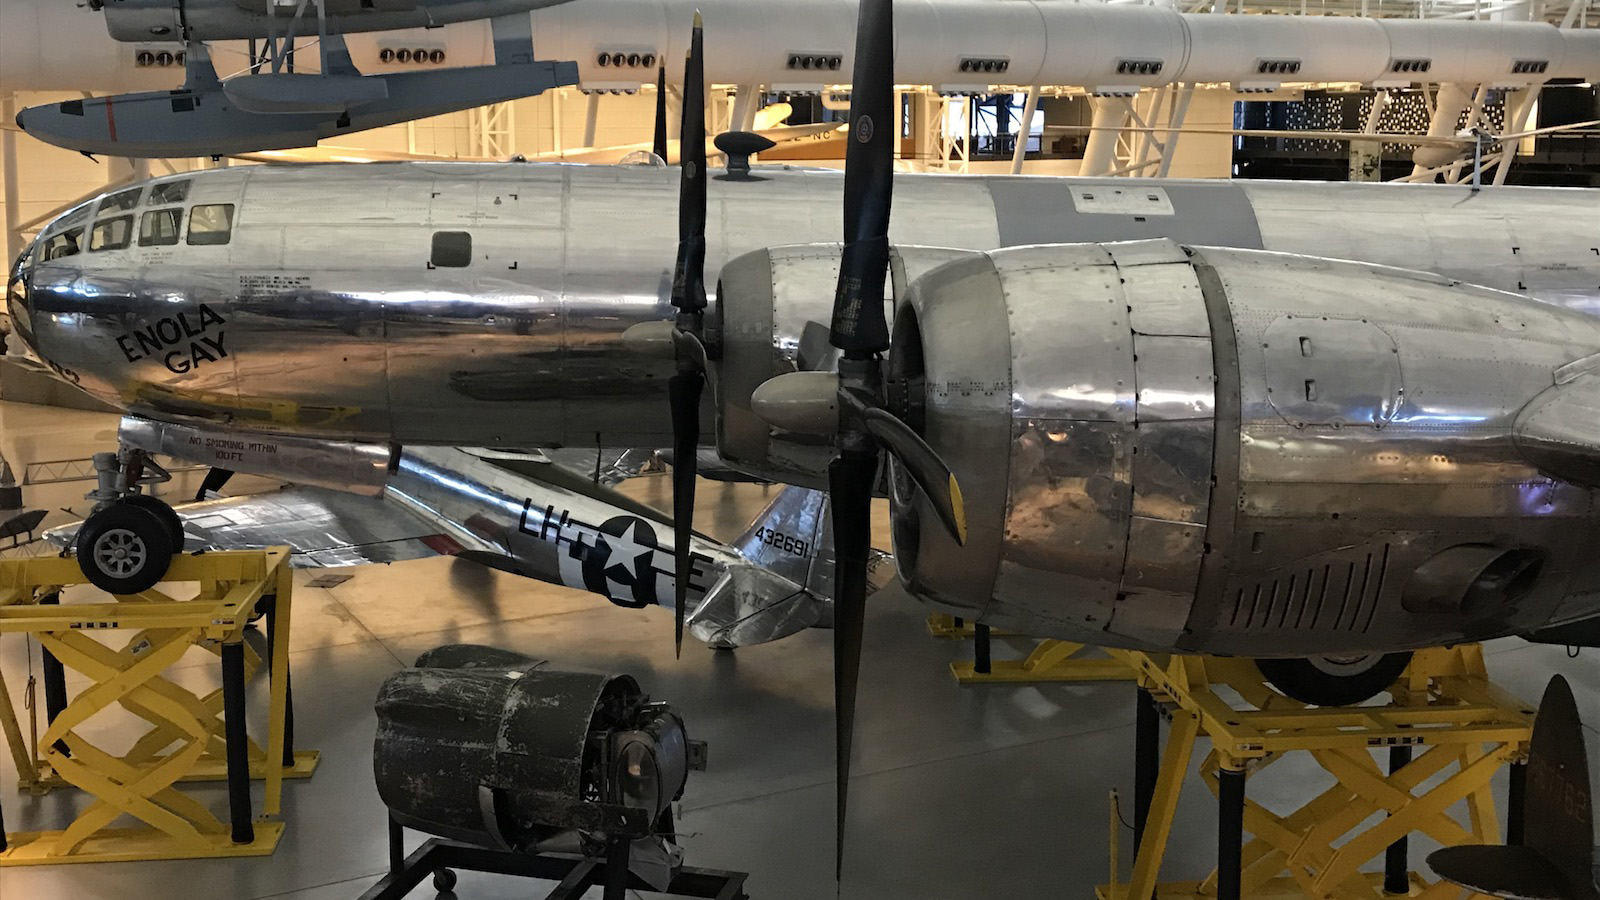 enola gay air and space museum